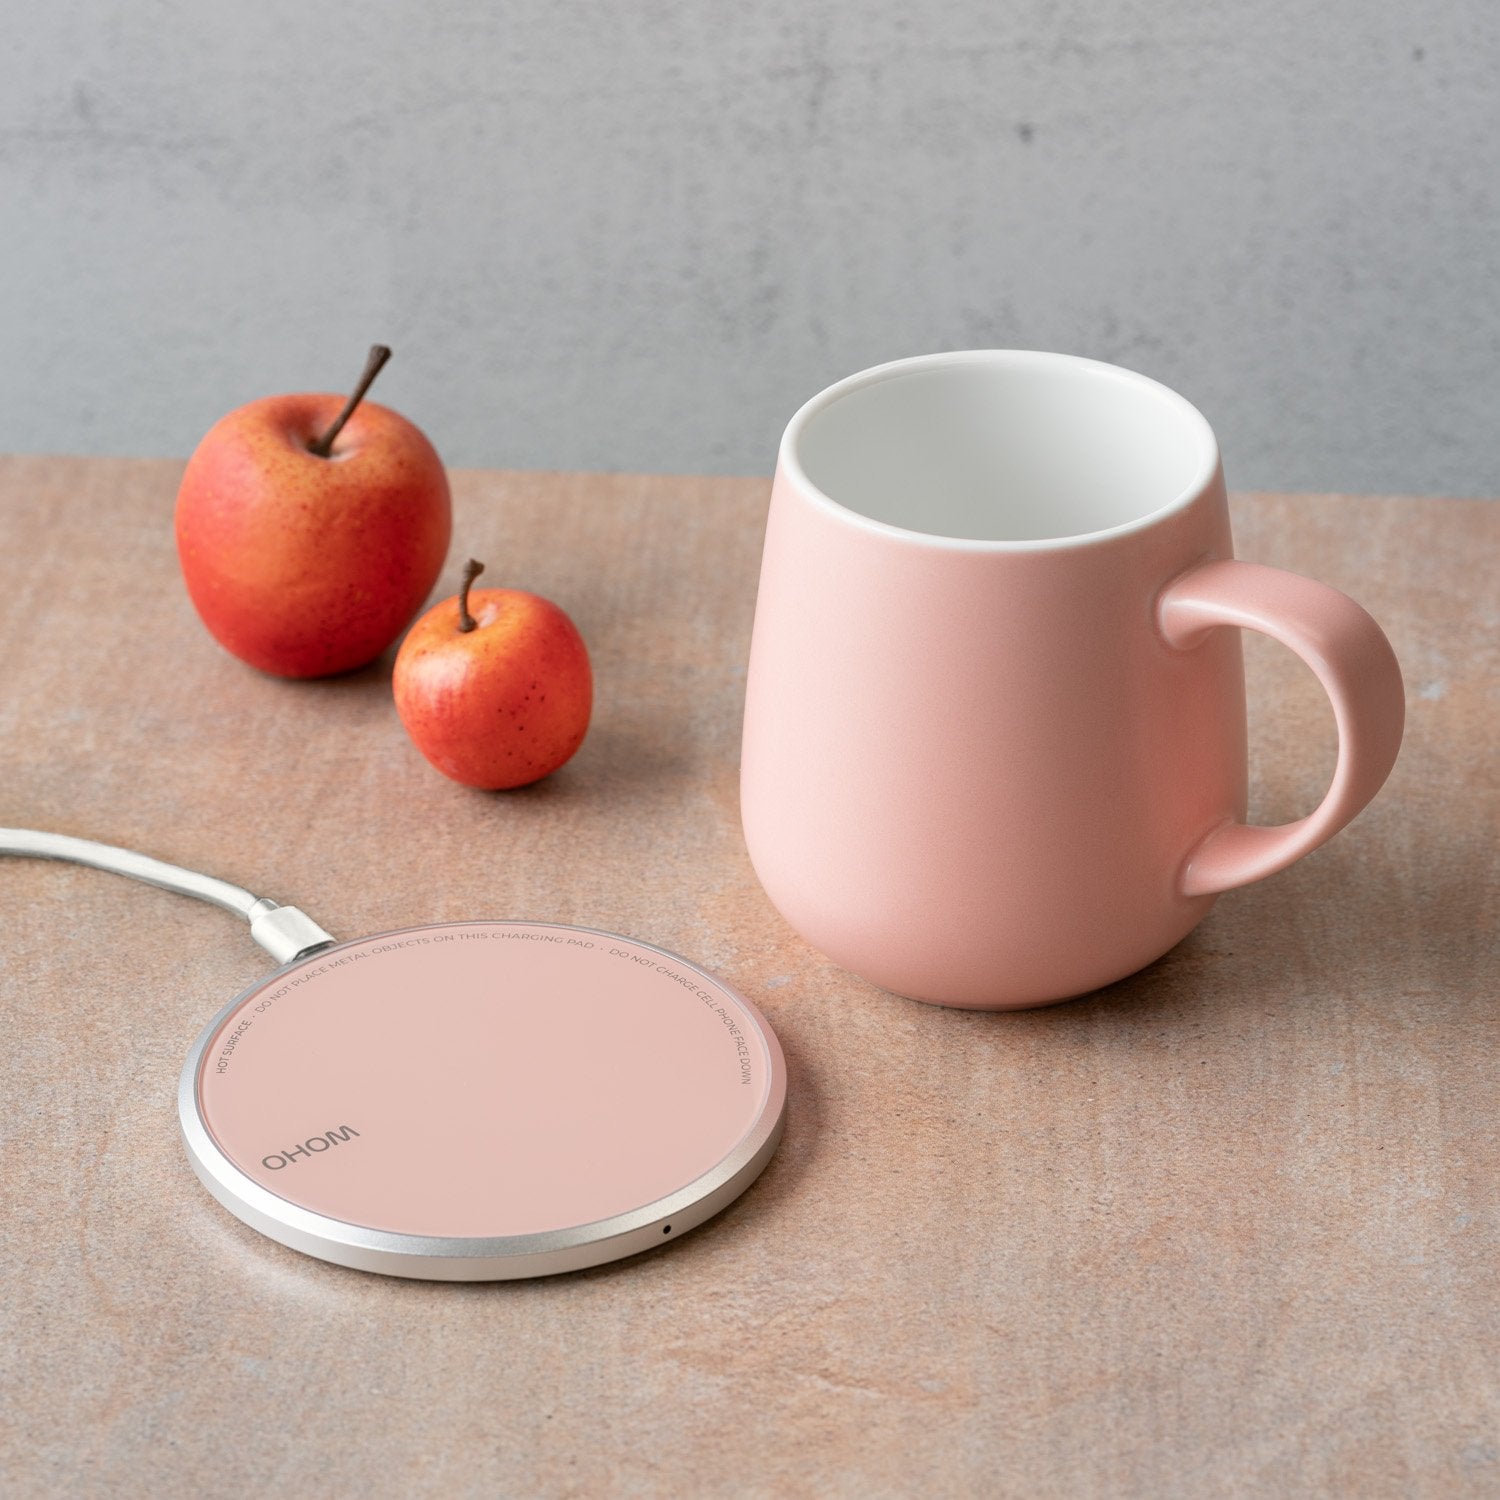 Pink mug next to heating pad with fruit on table